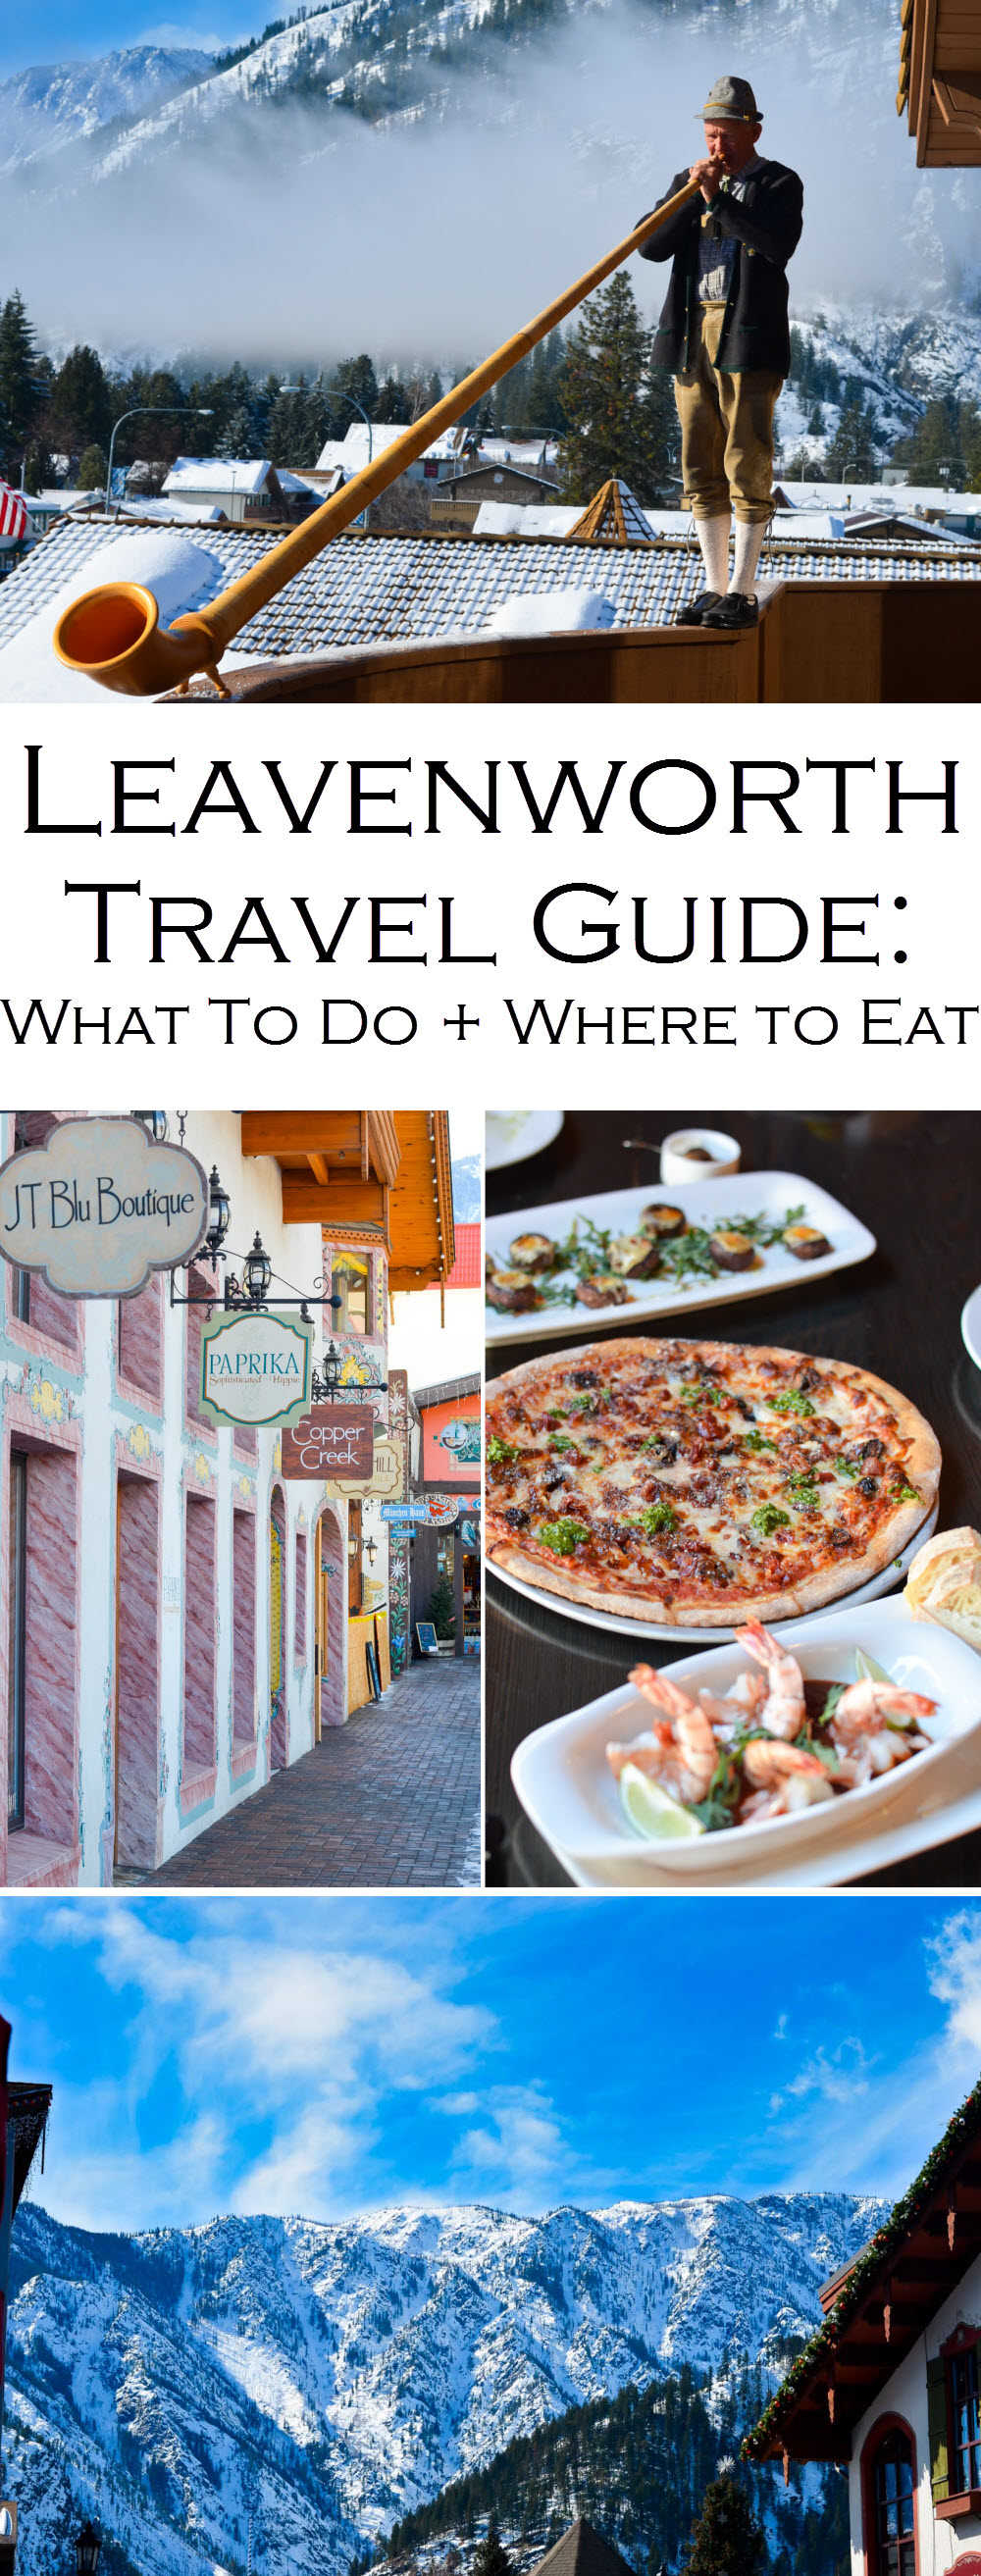 Where to Eat + Stay, What to Do in Leavenworth, Washington Travel Guide. A fun Bavarian town in the PNW. A great day trip from Yakima or a weekend trip from Seattle. #PNW #washington #ustravel #travelblog #travelblogger #lpworldtravels